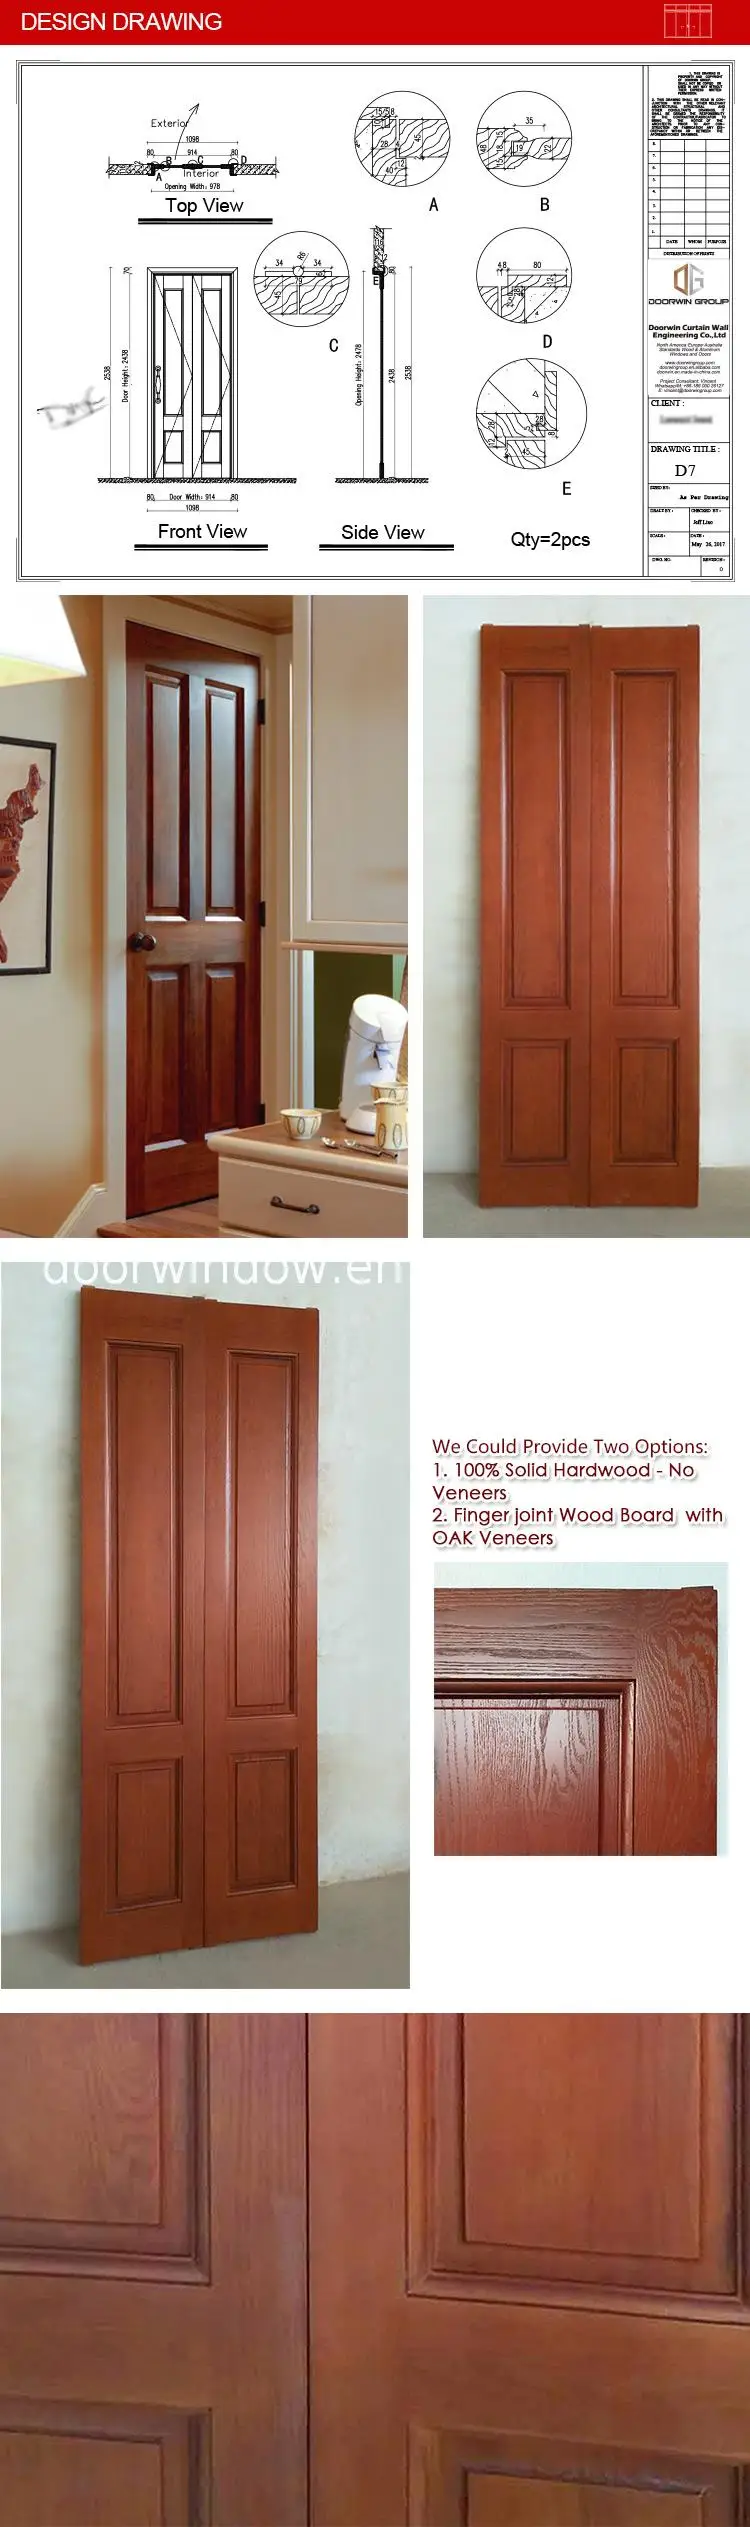 Factory Directly Supply wood front door with sidelights french doors exterior lowes